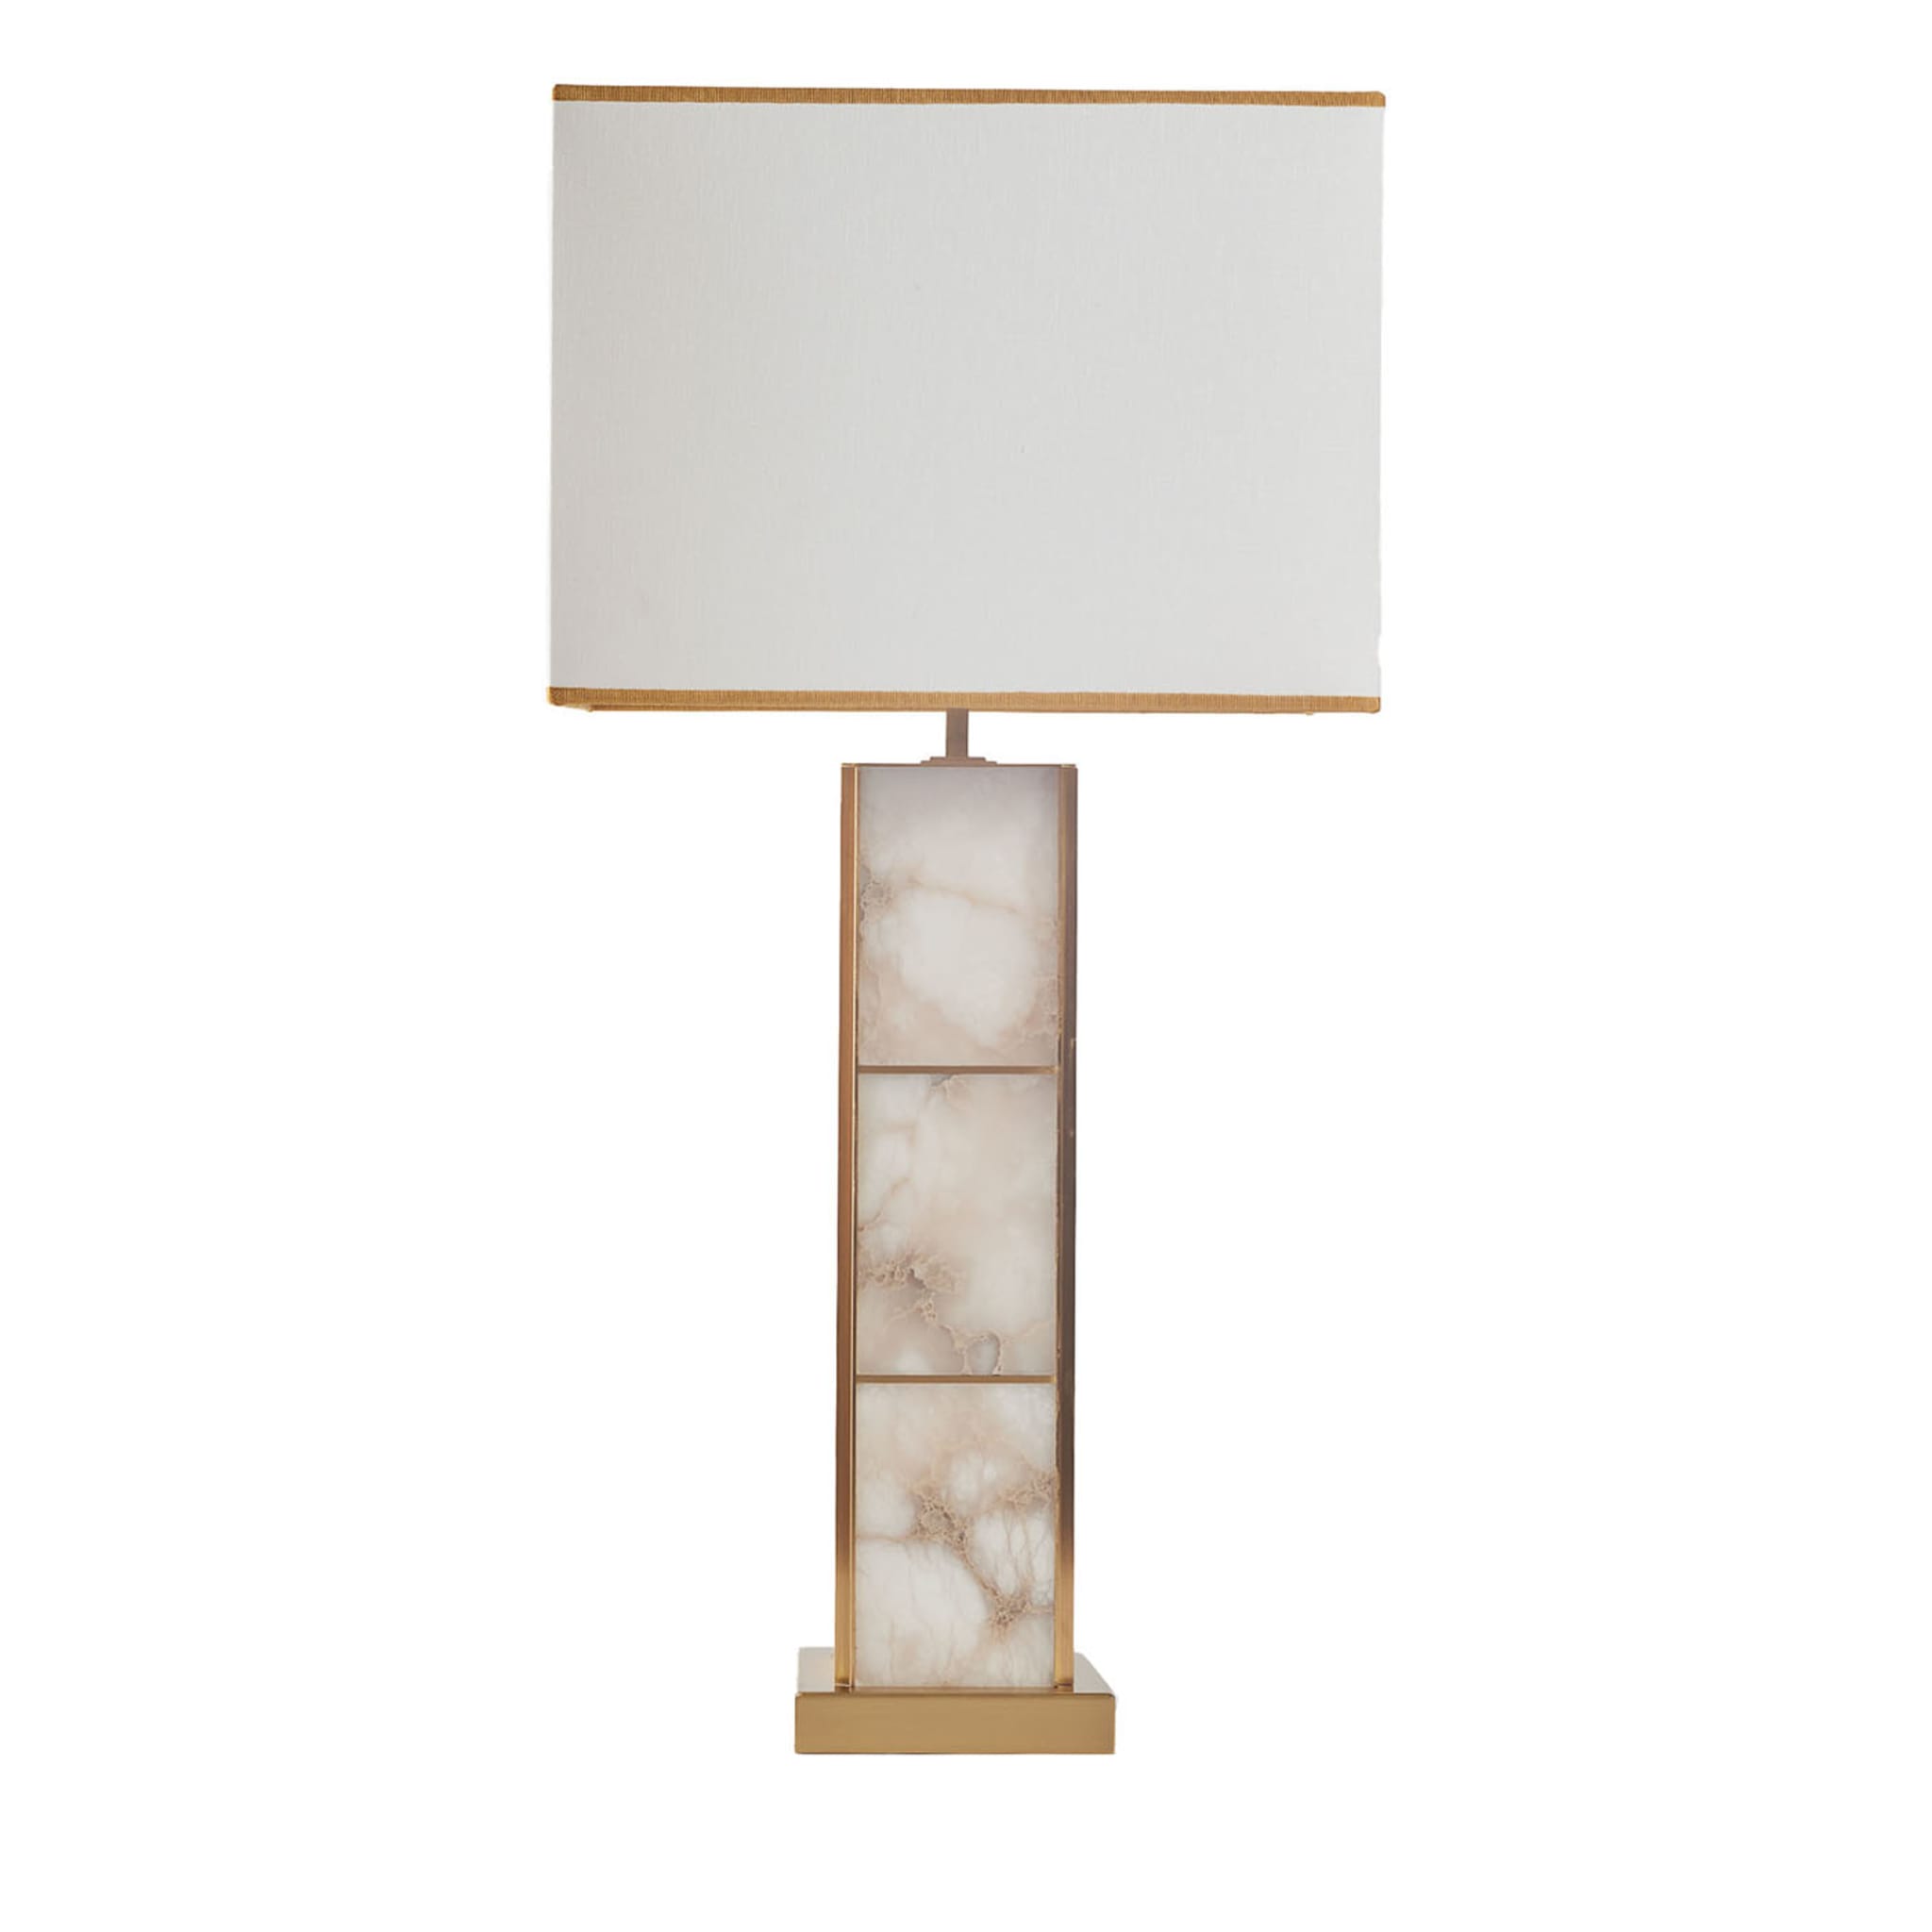 "Mole" Table Lamp in Satin Brass and Alabaster - Main view